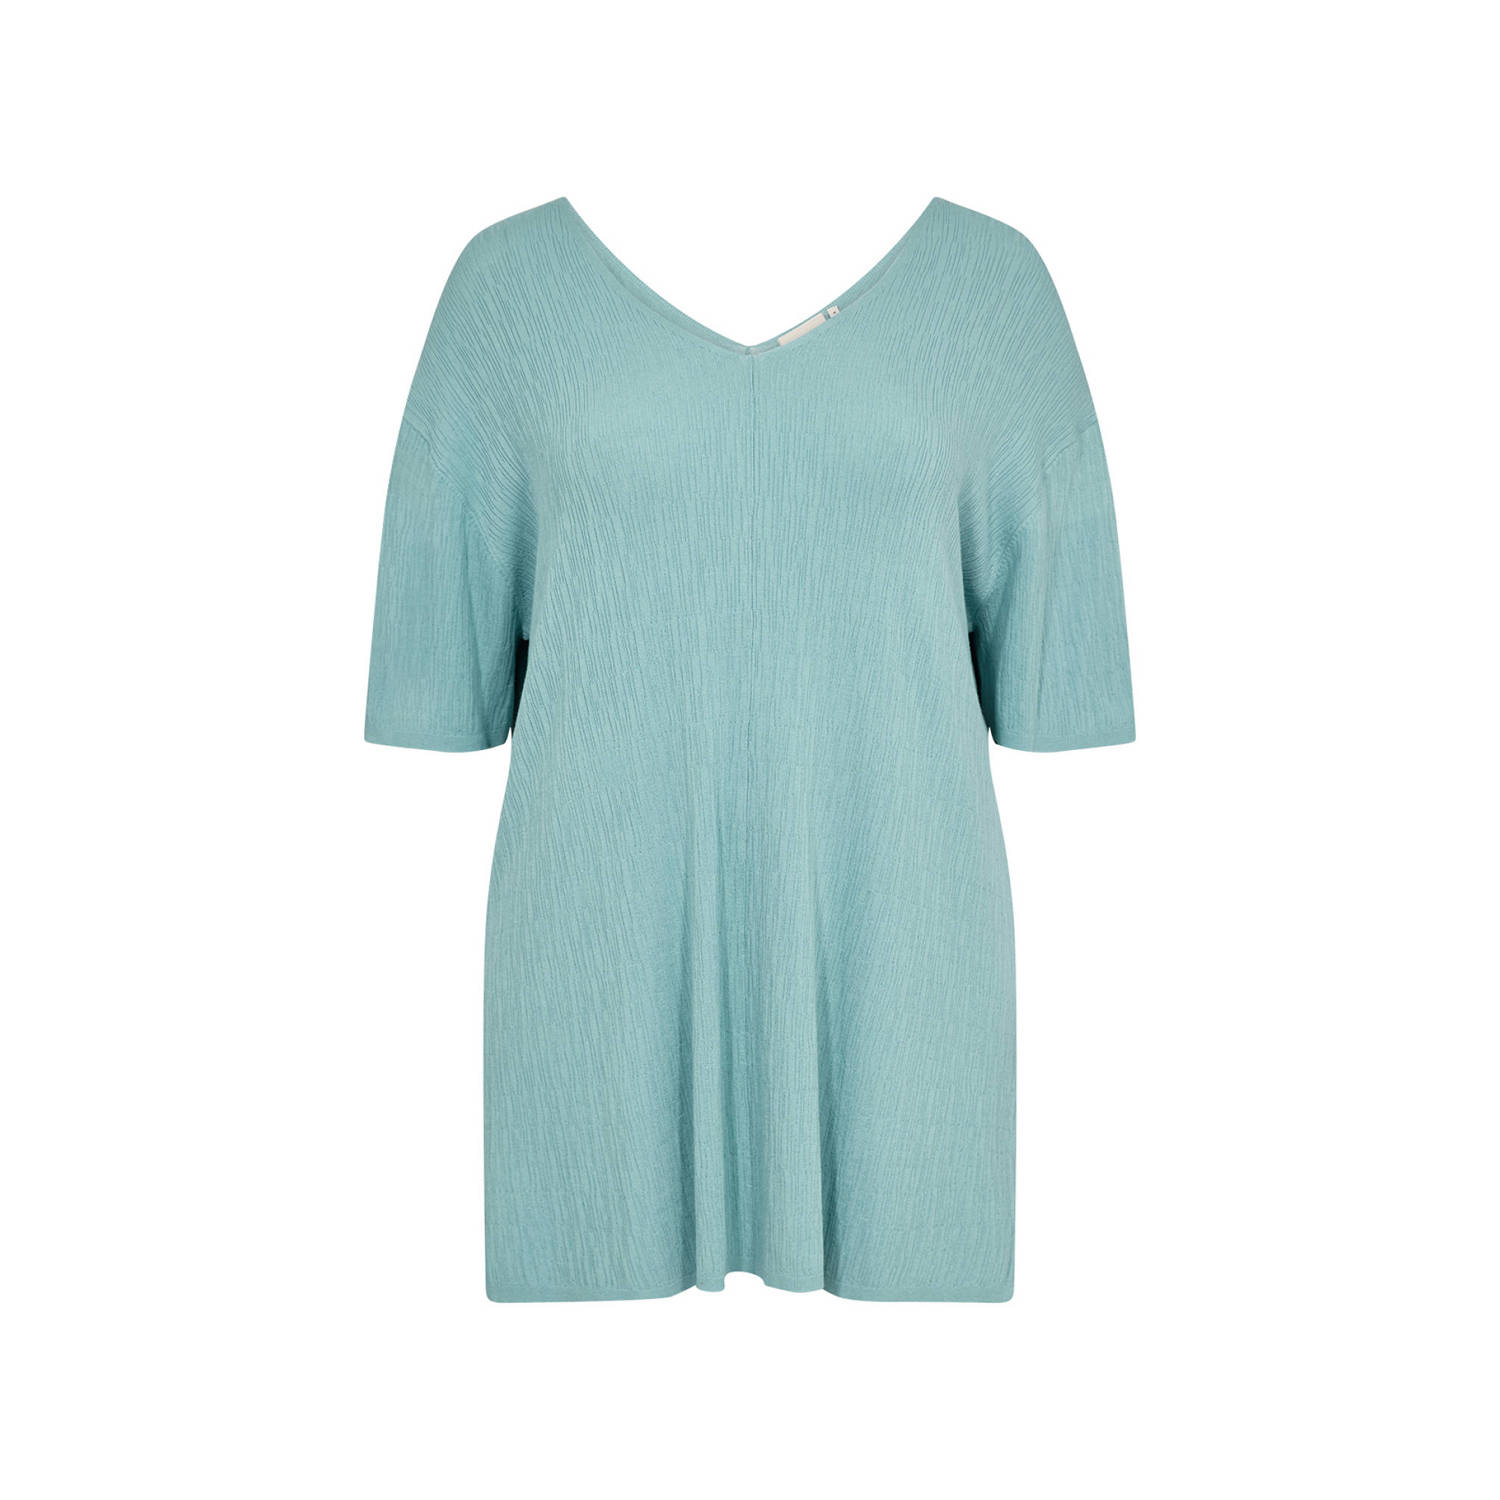 Wasabiconcept top turquoise